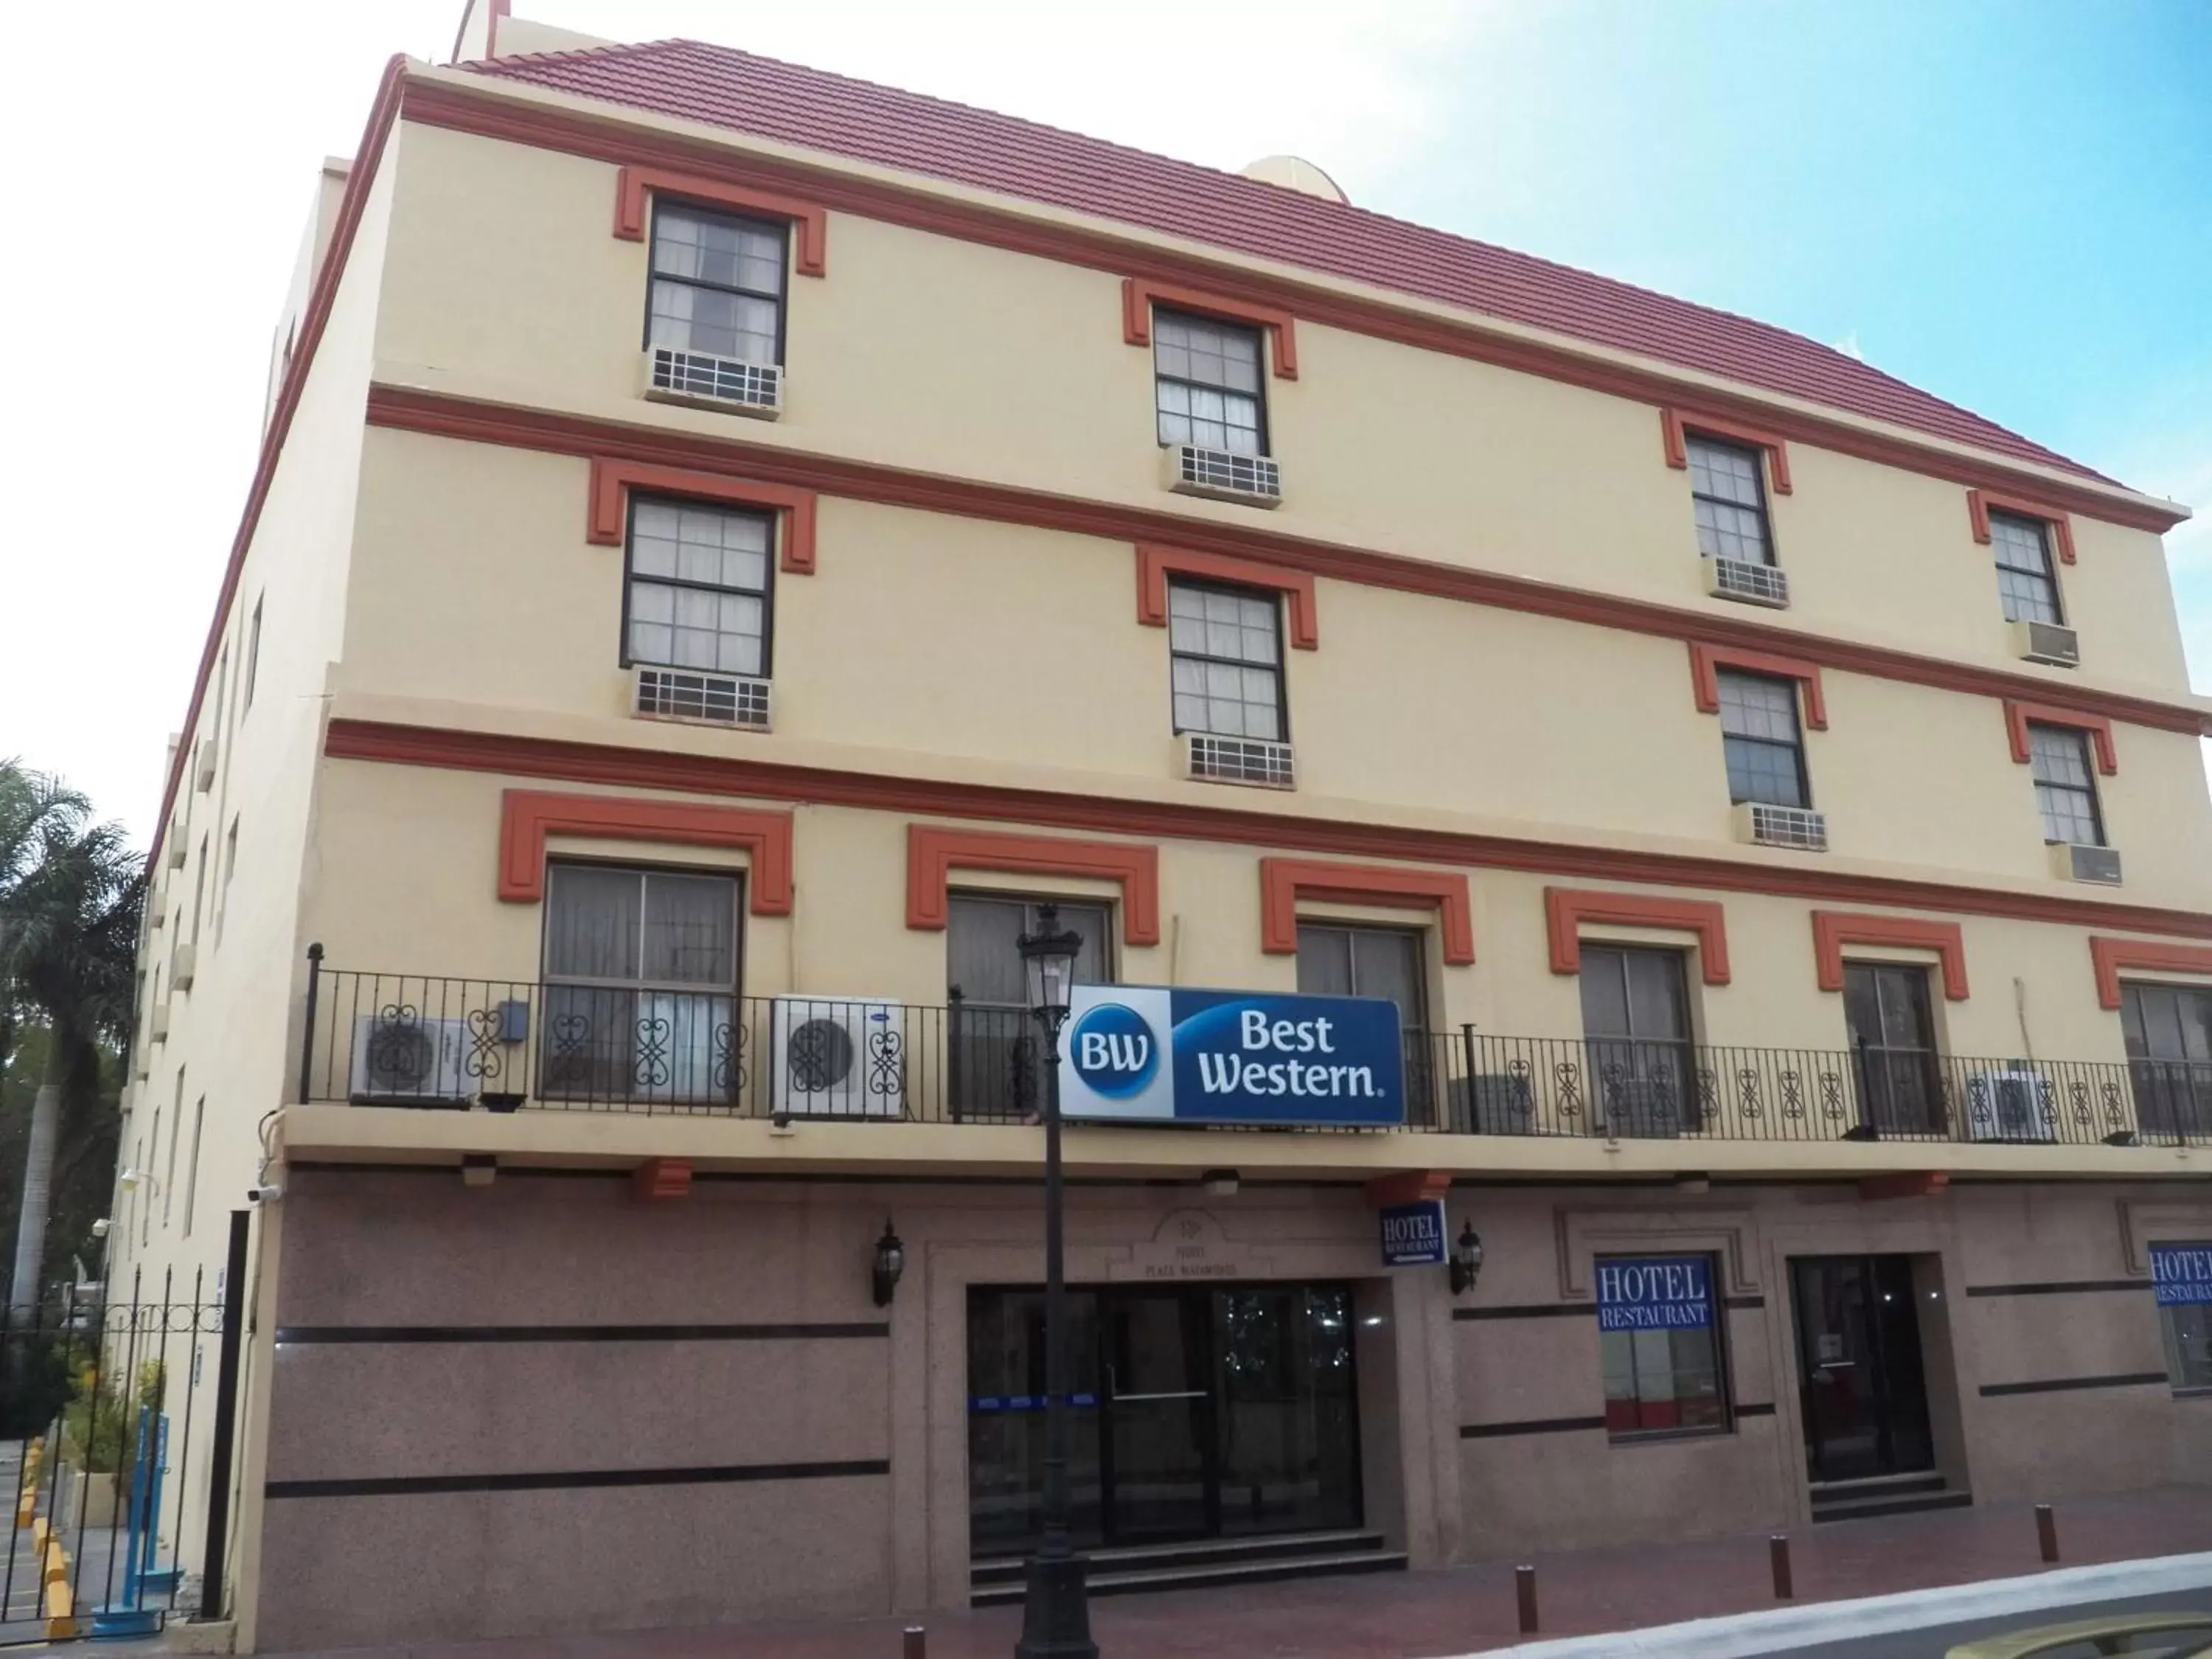 Property Building in Best Western Hotel Plaza Matamoros